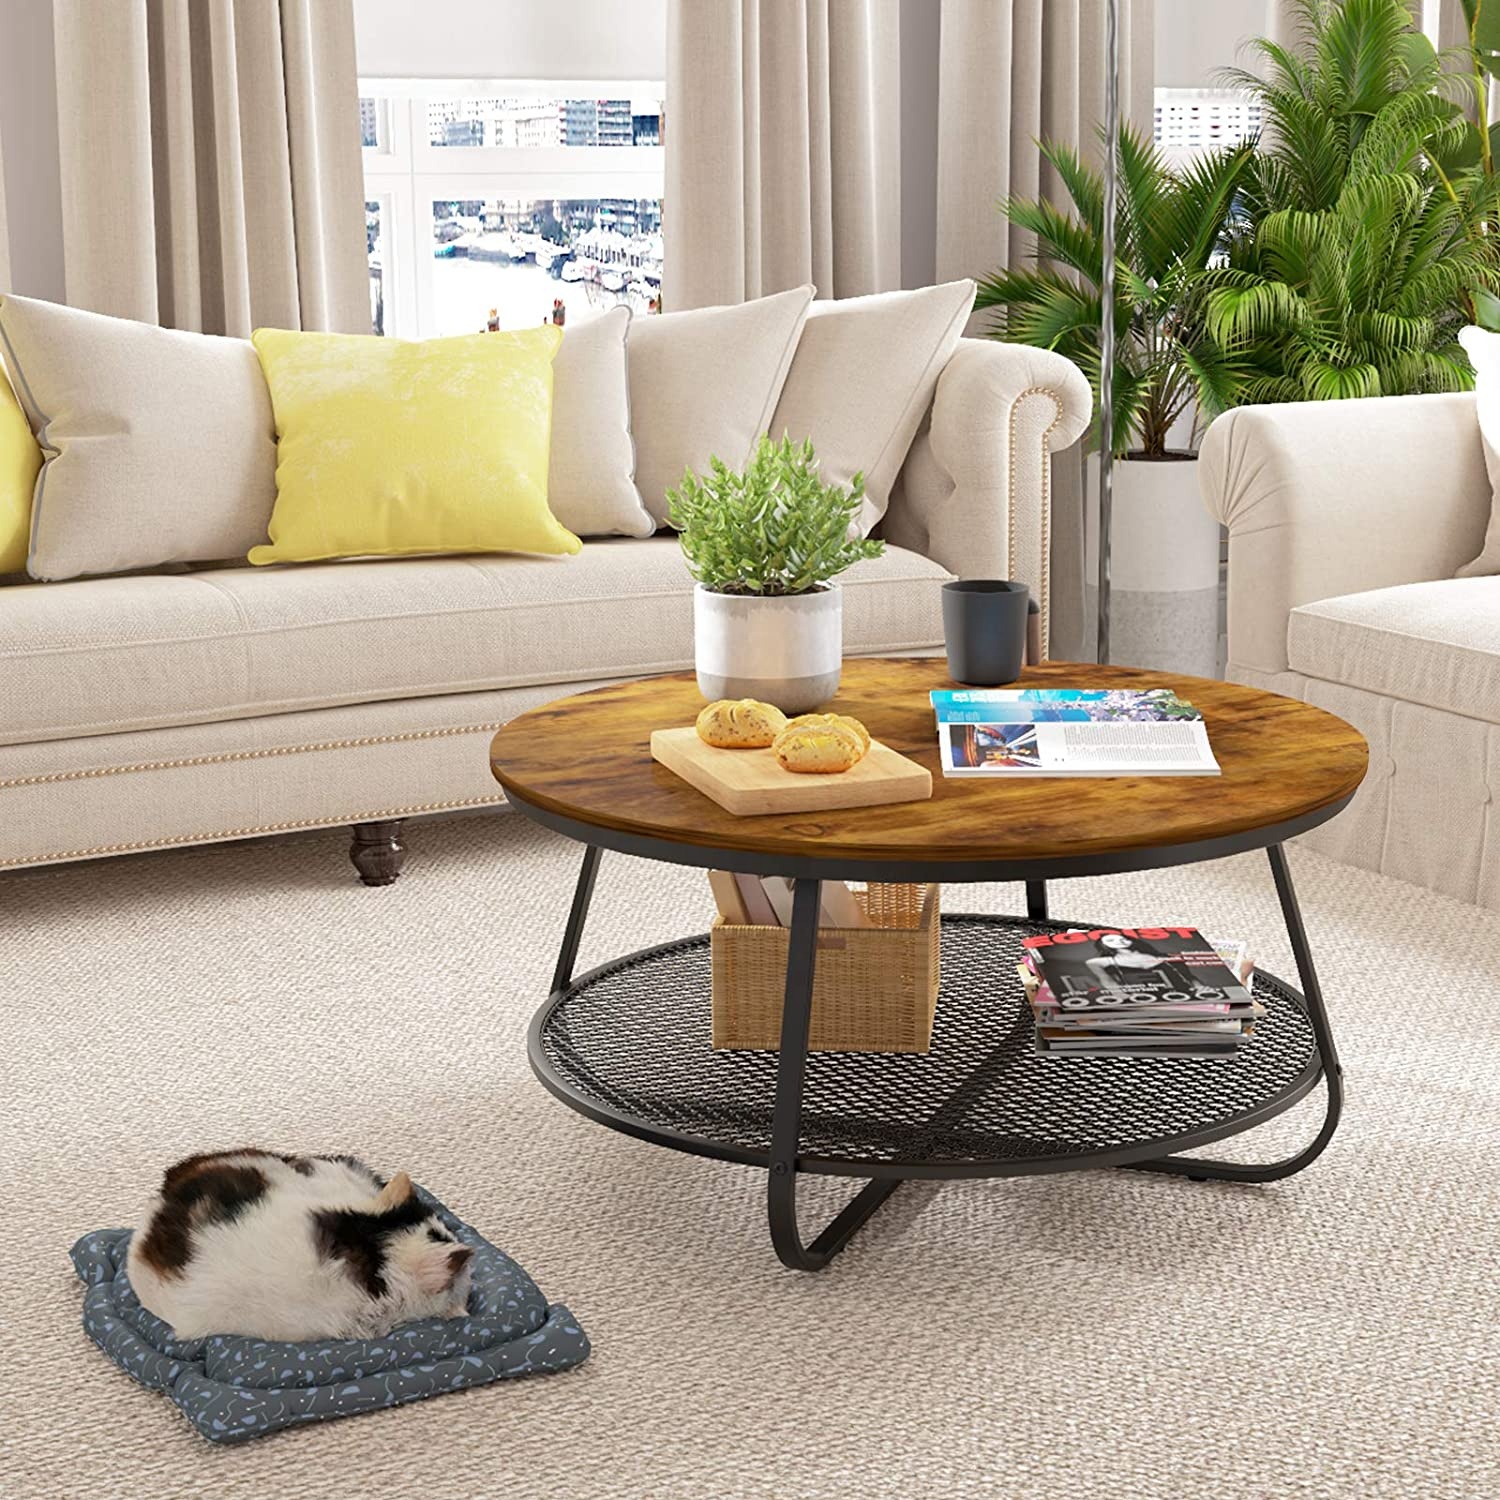 High Quanlity Luxury Style Mordern Wholesale 2 Layers Detachable Round Wooden Metal Mix Side Coffee Table Easy Assembly